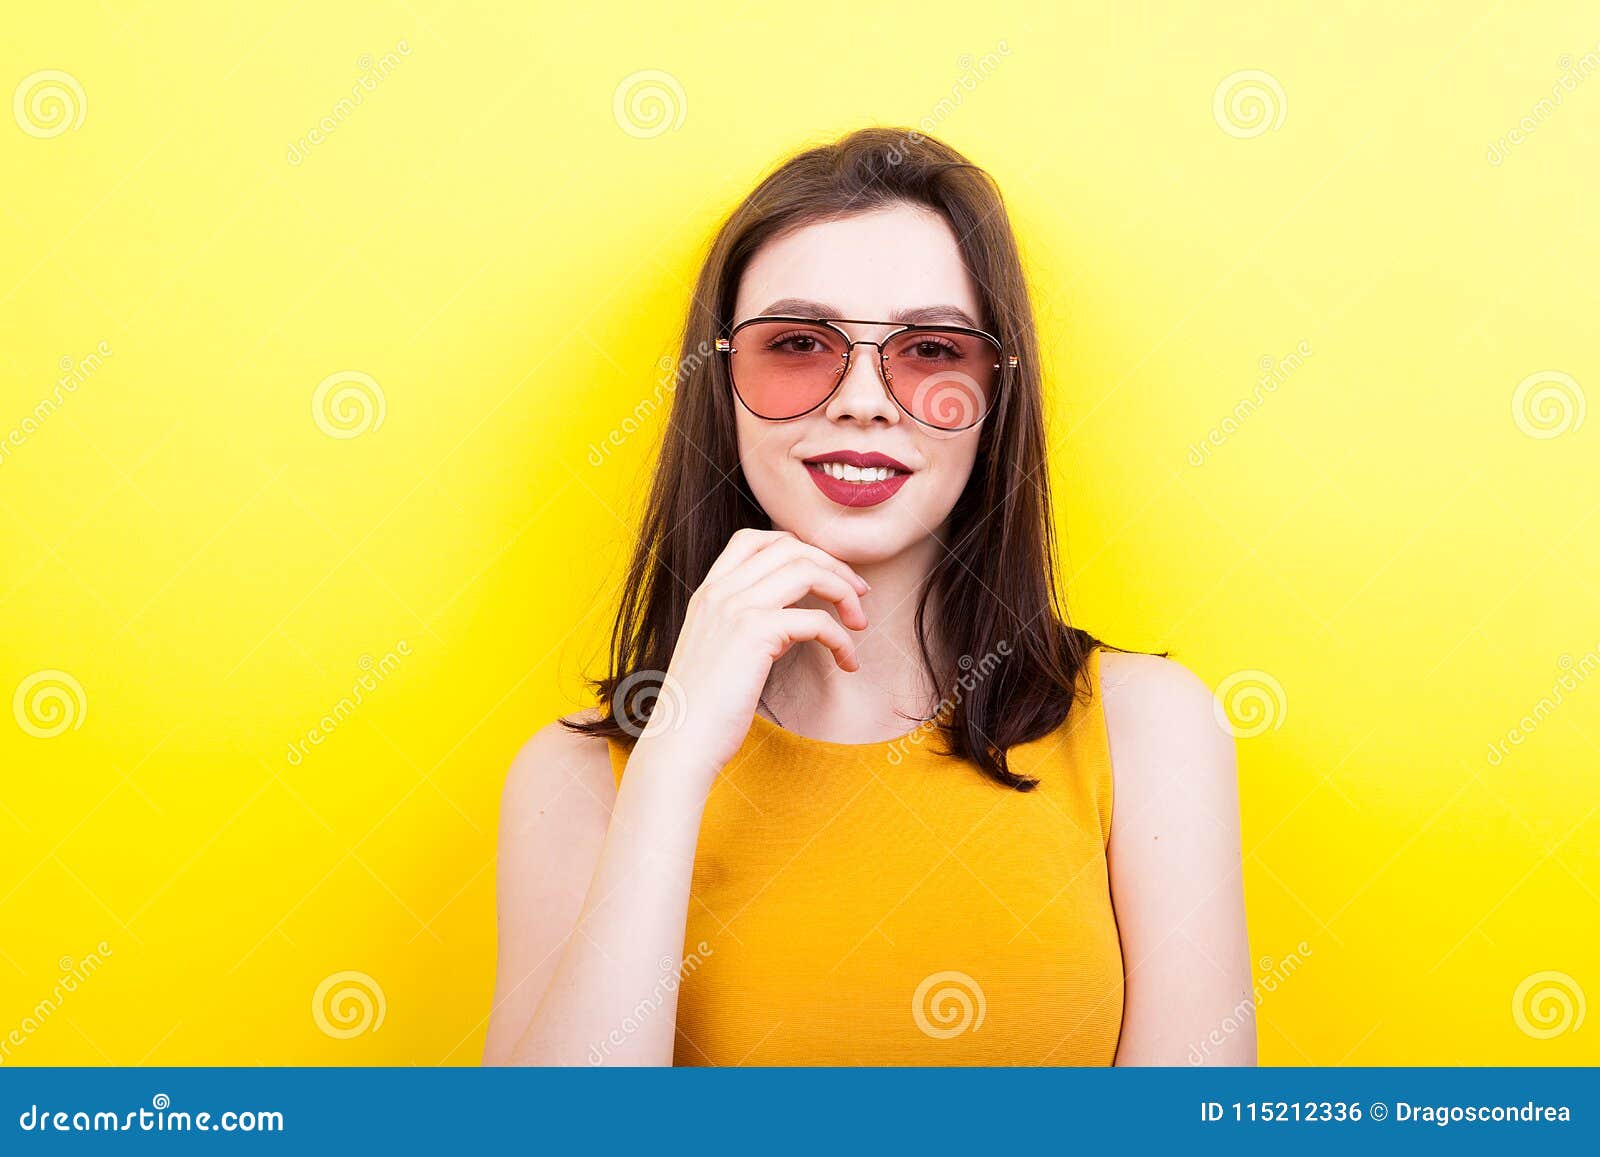 Woman Wearing Sunglasses Smiling To the Camera Stock Photo - Image of ...